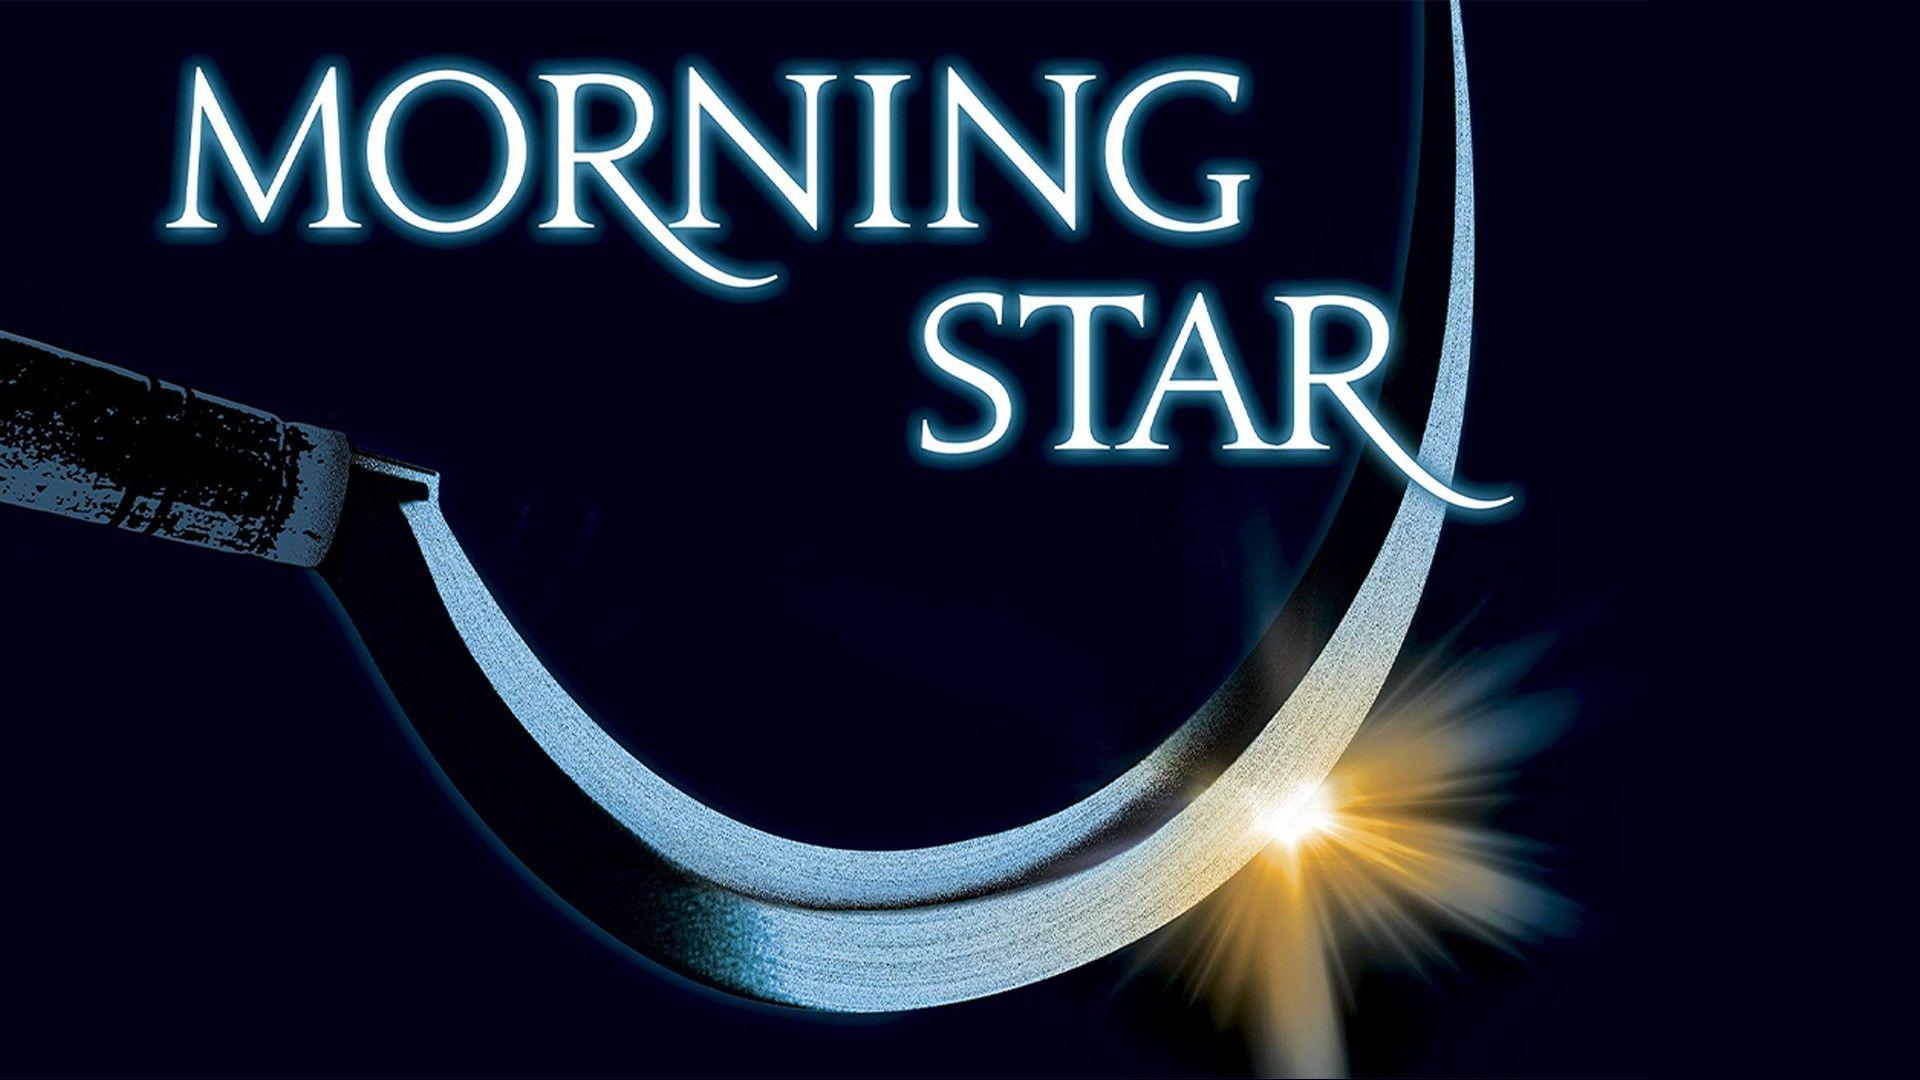 Download the Morning Star Sickle Wallpaper, Morning Star Sickle